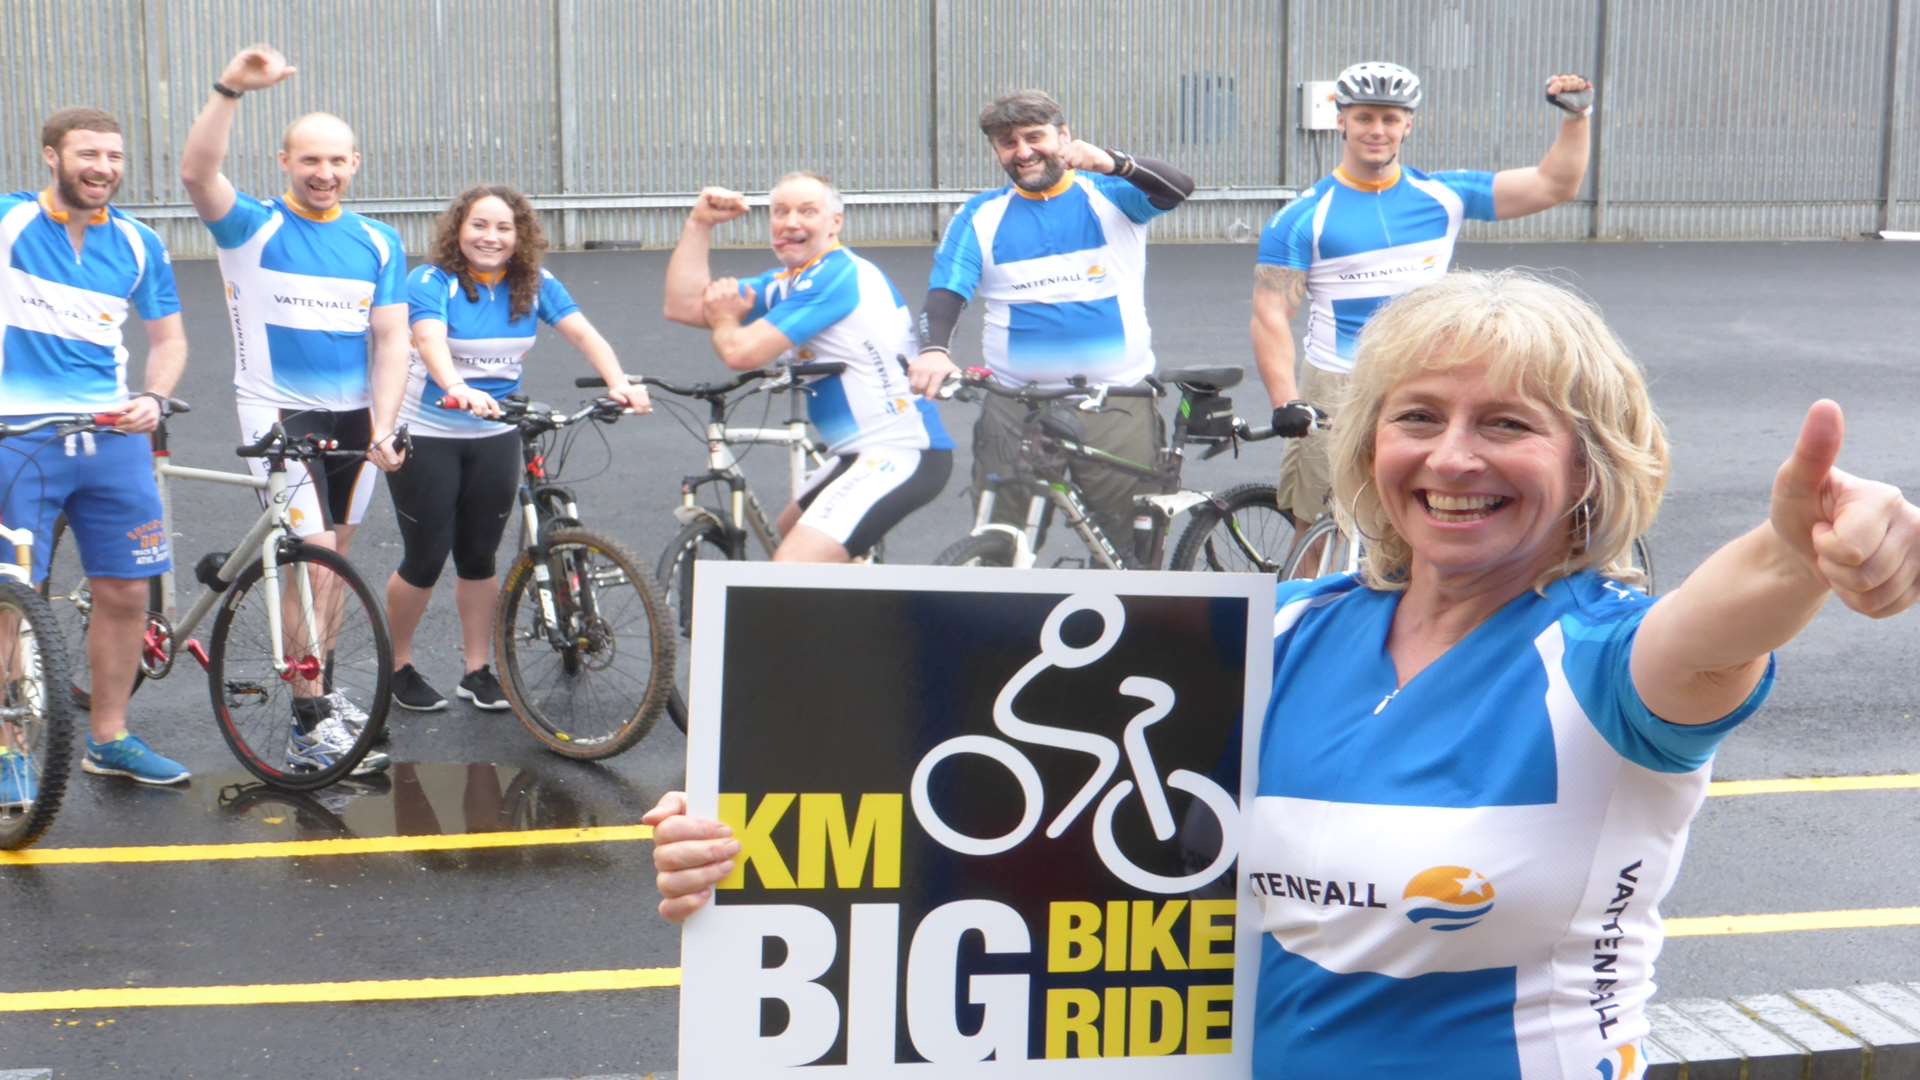 Melanie Rogers and staff at Vattenfall unveil key partnership with the KM Charity Team for the KM Big Bike Ride, staged at Betteshanger Park on Sunday, April 24.